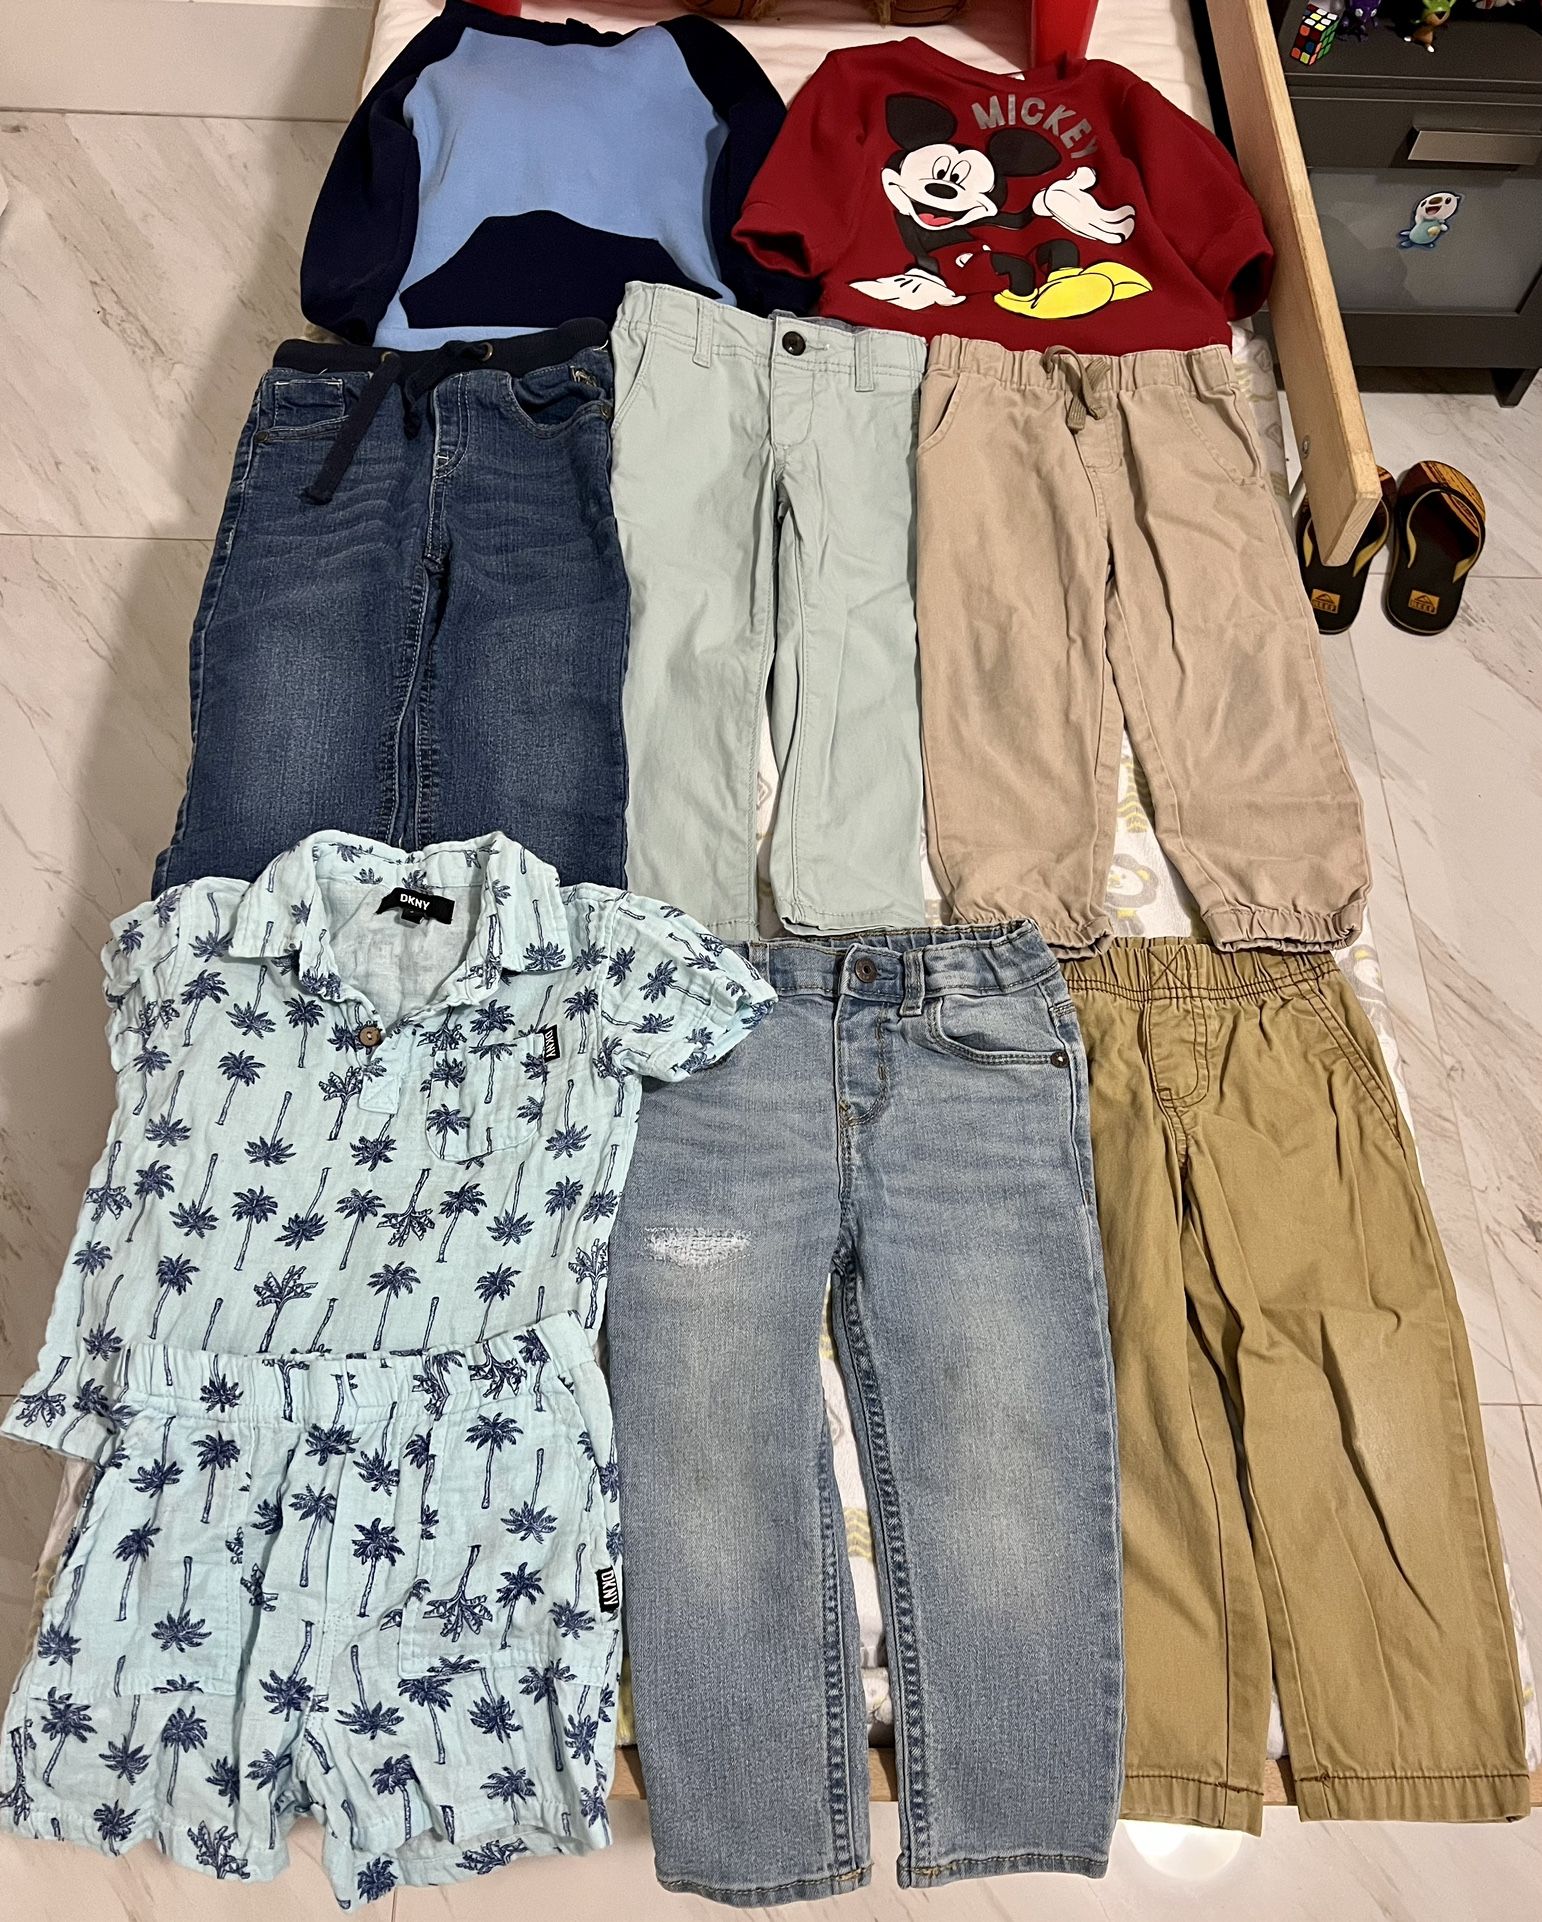 Boys Clothes (2-3 years old) OVER 20 Pieces 